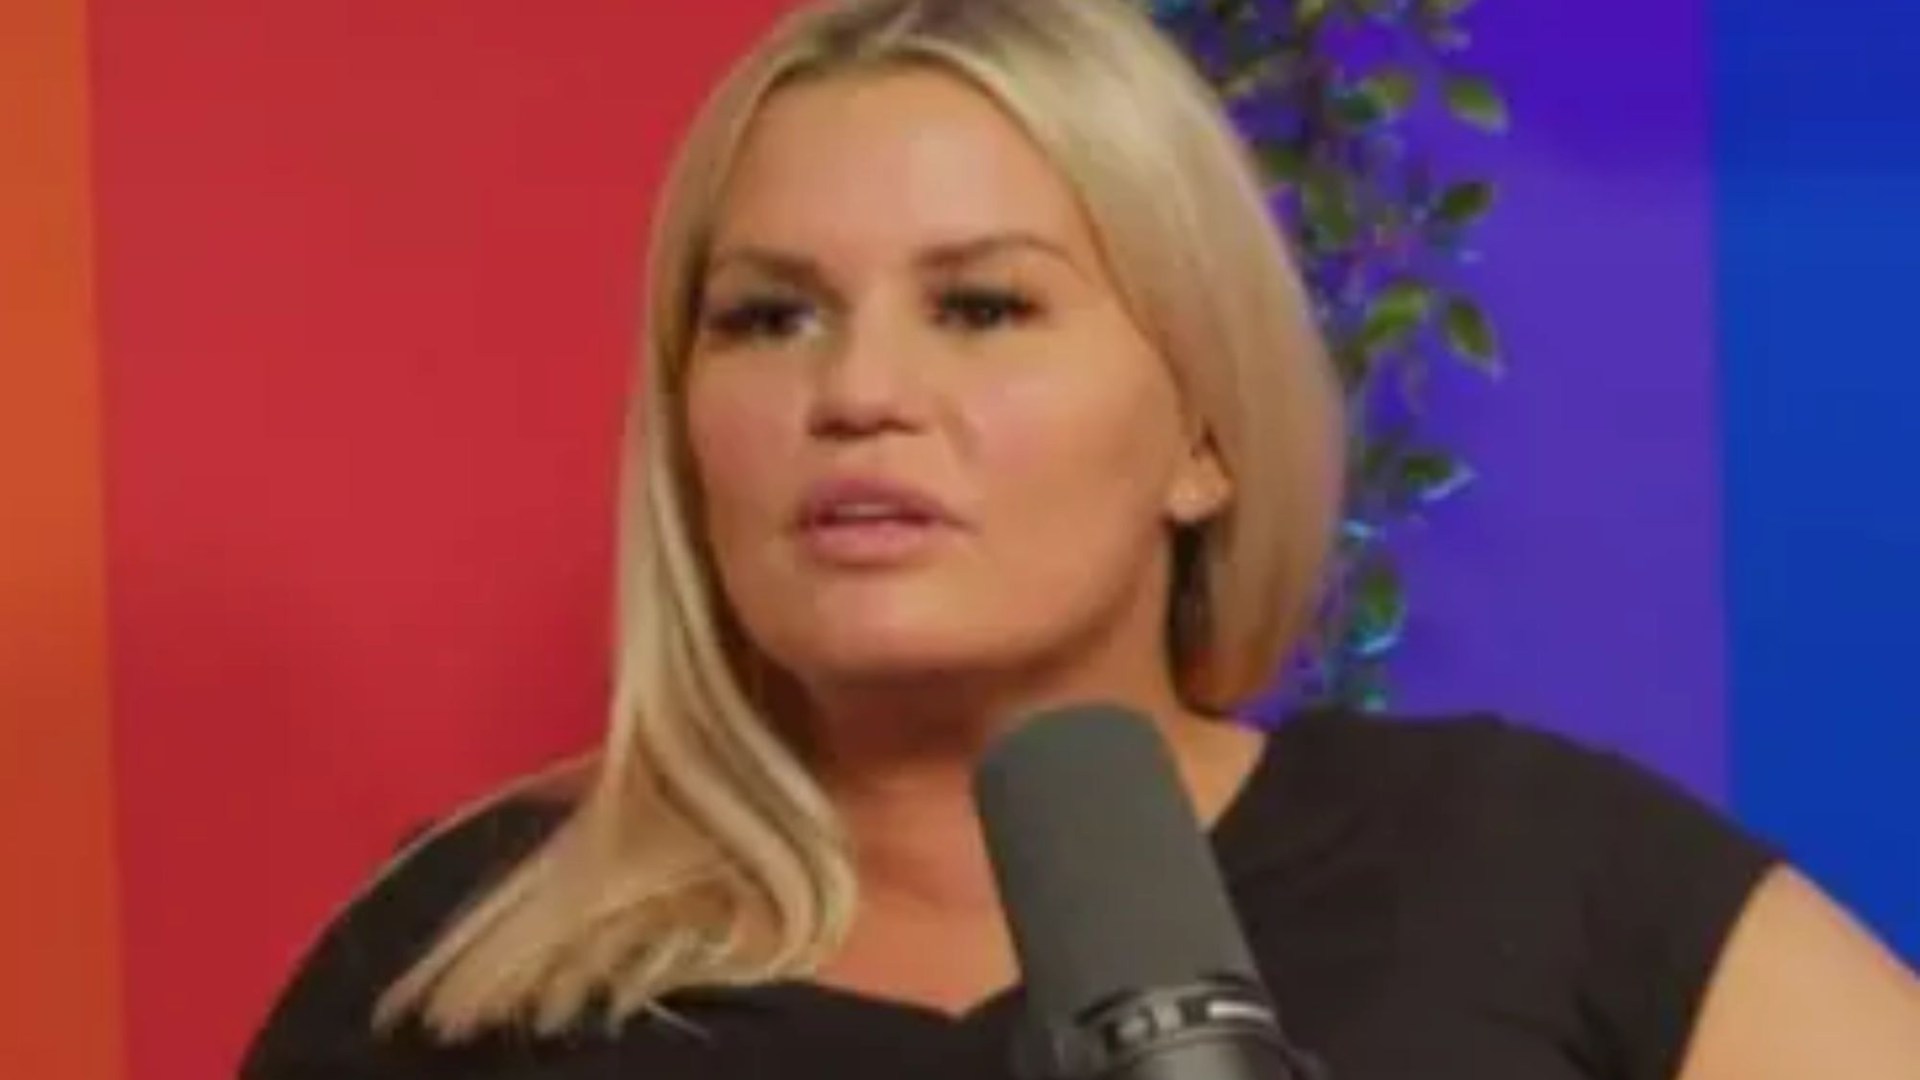 Kerry Katona says she was left ‘absolutely humiliated’ after being quizzed on sex life in front of her kids